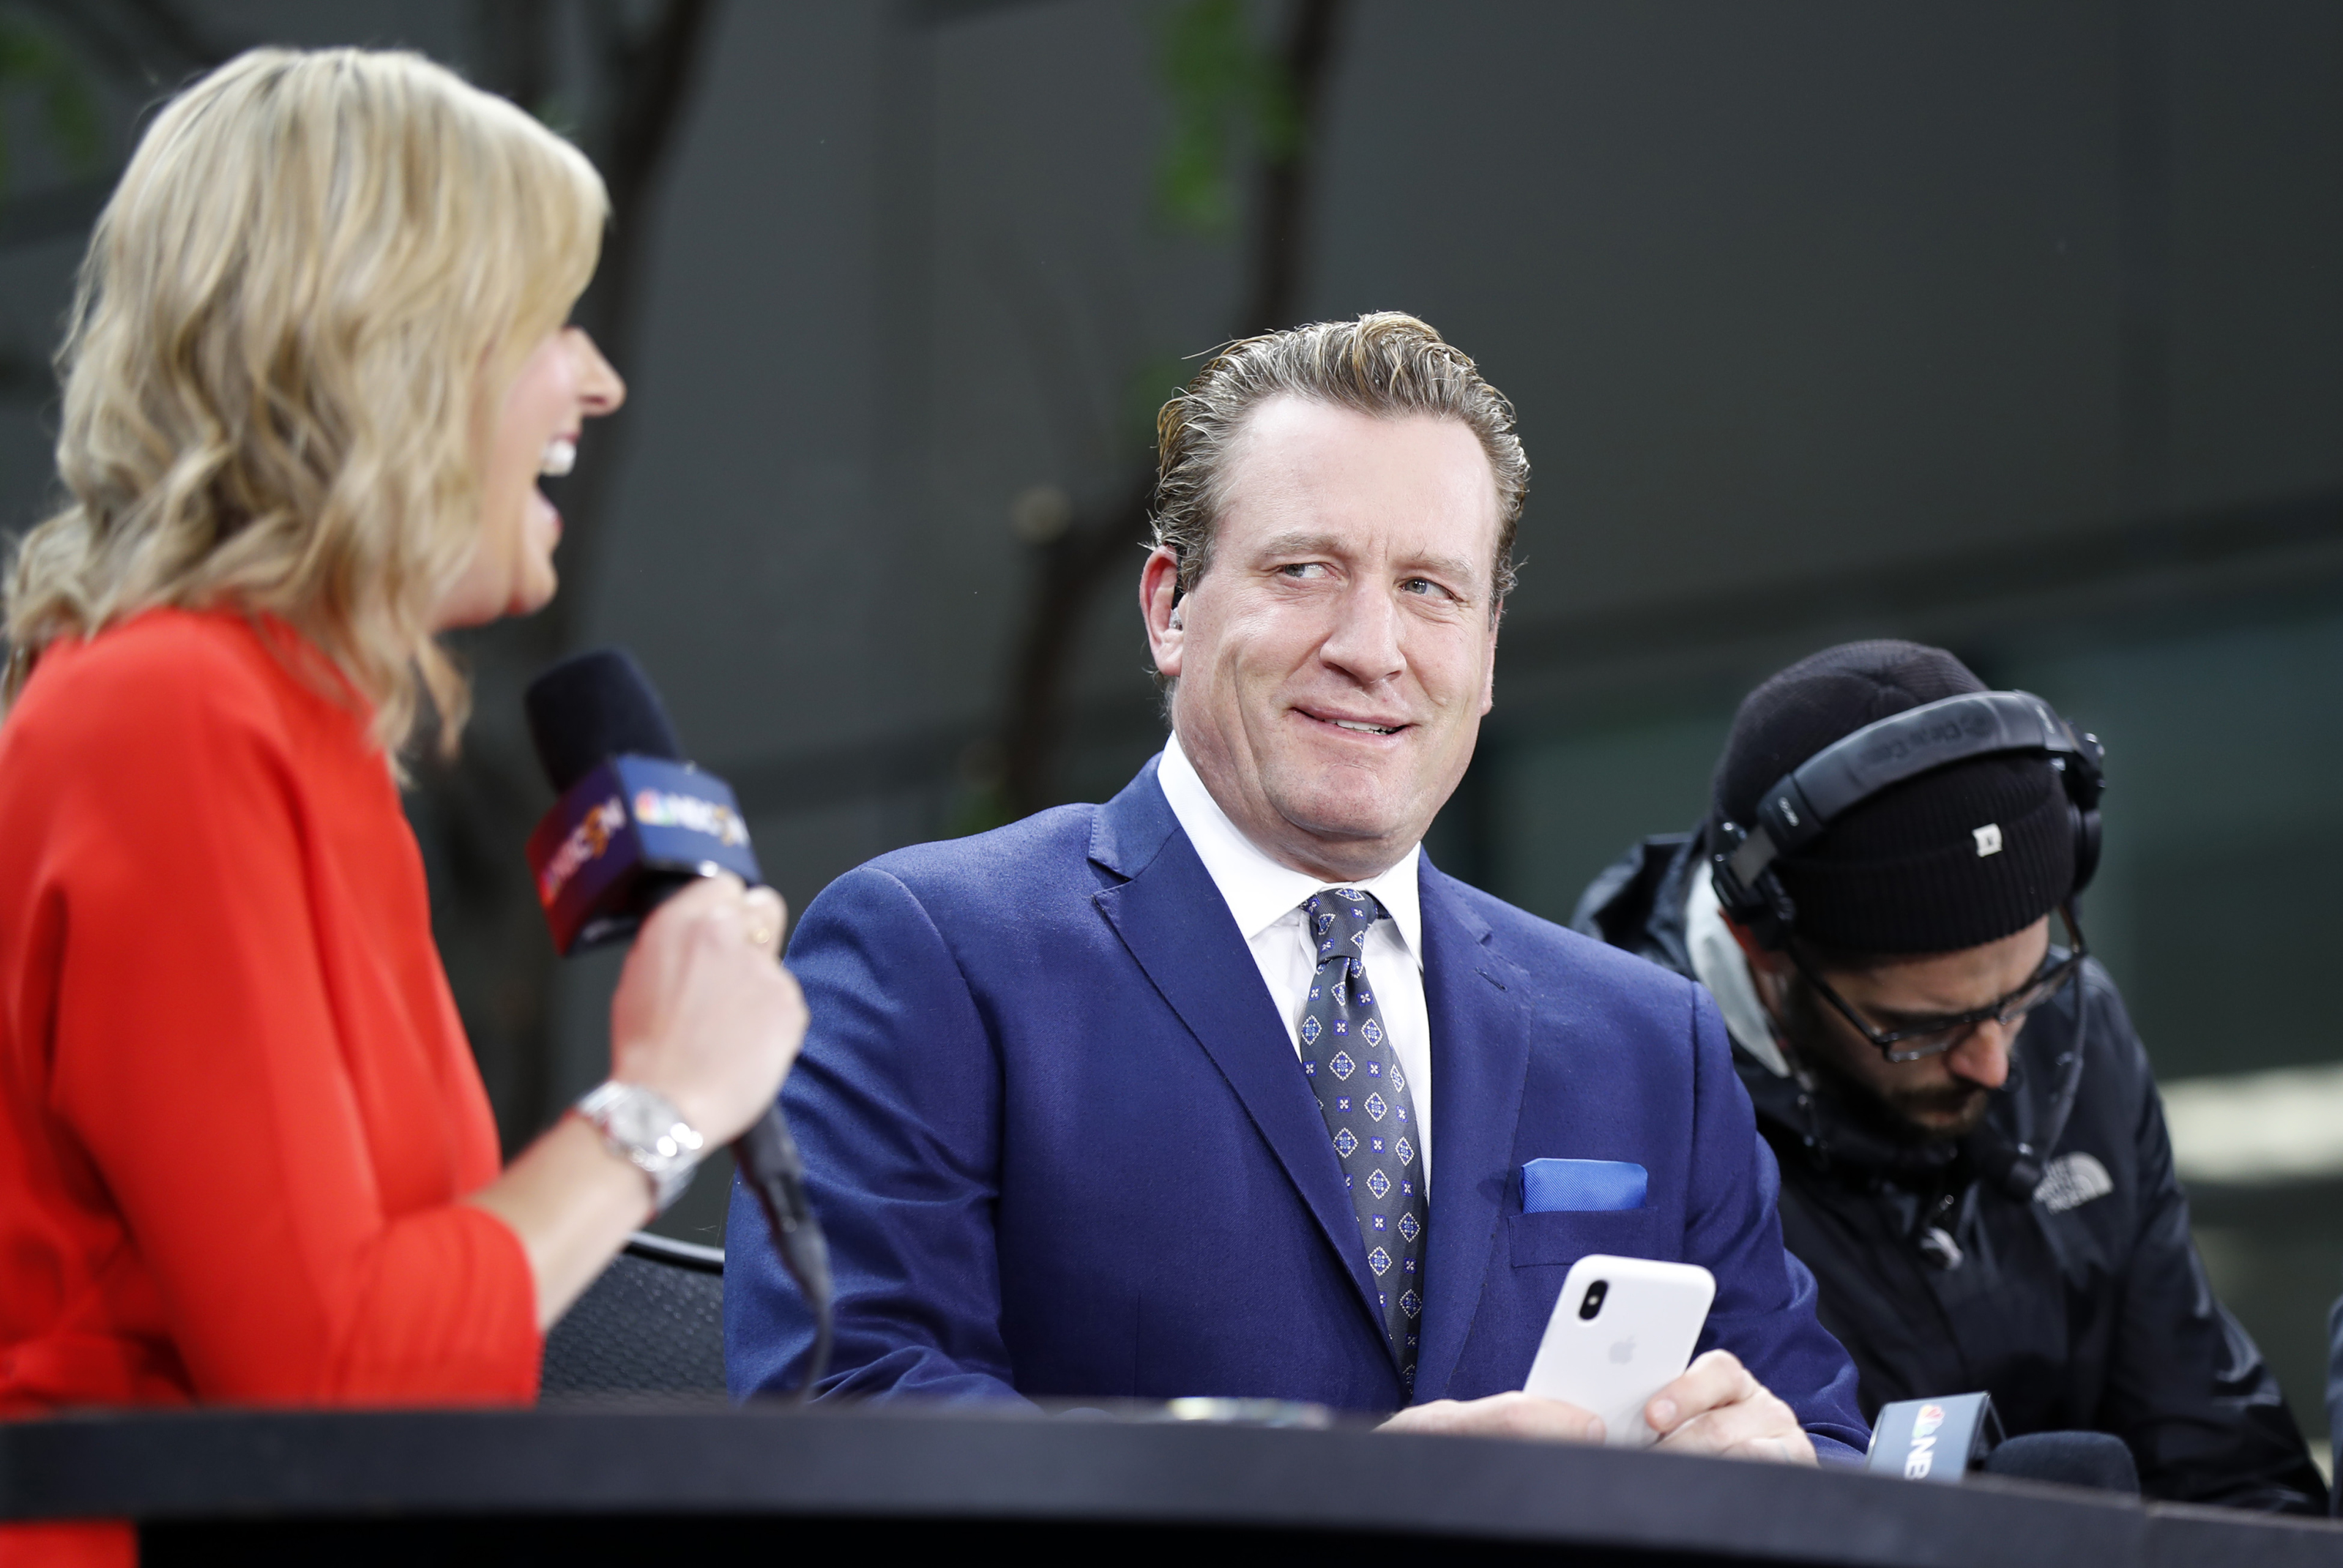 Jeremy Roenick Fired From NBC Sports Over Sexual Remarks About